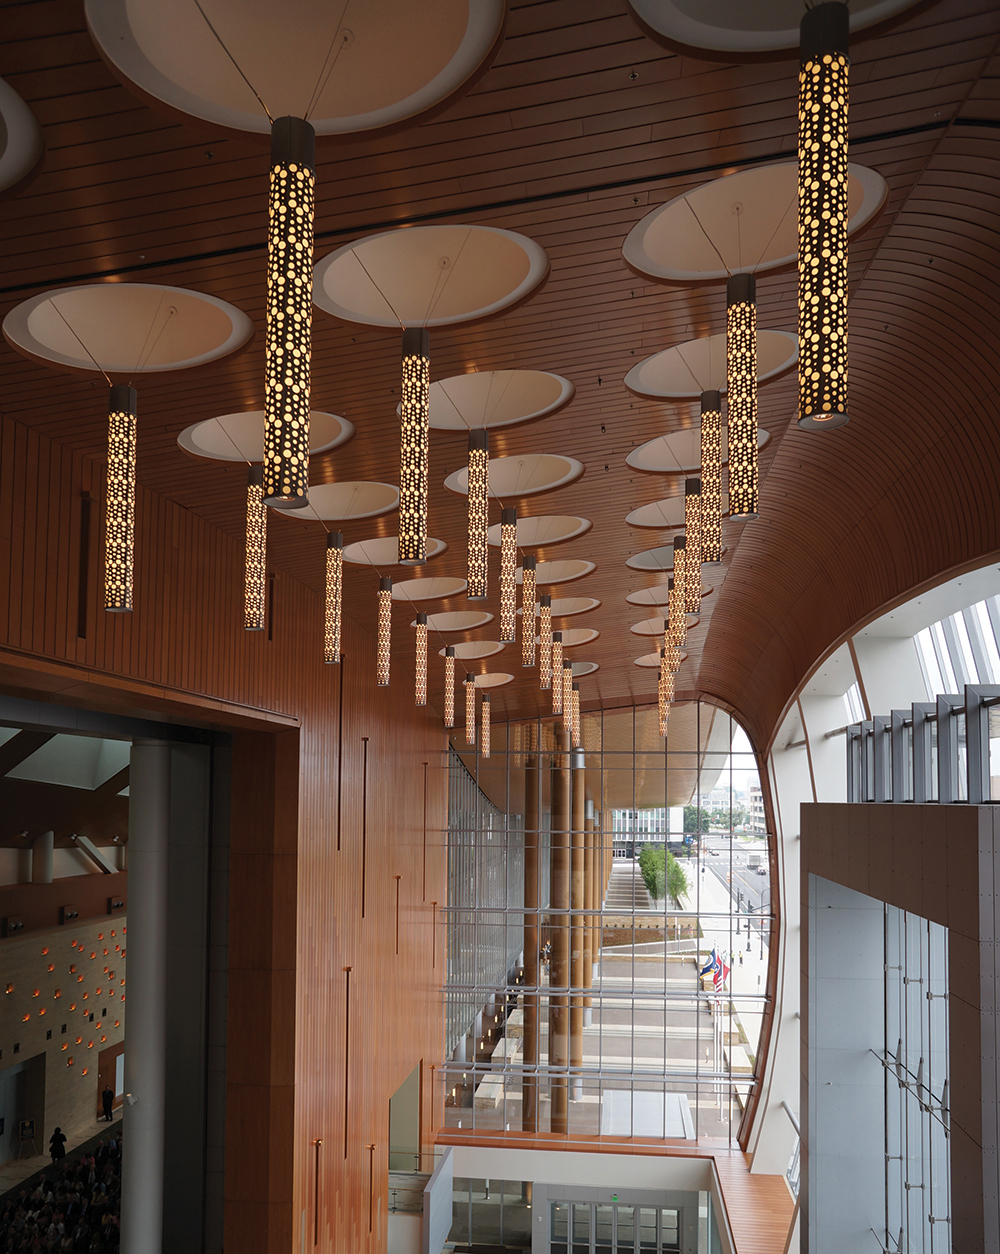 Sequence custom light fixtures with lace-like body design, mounted above a large, windowed entryway.